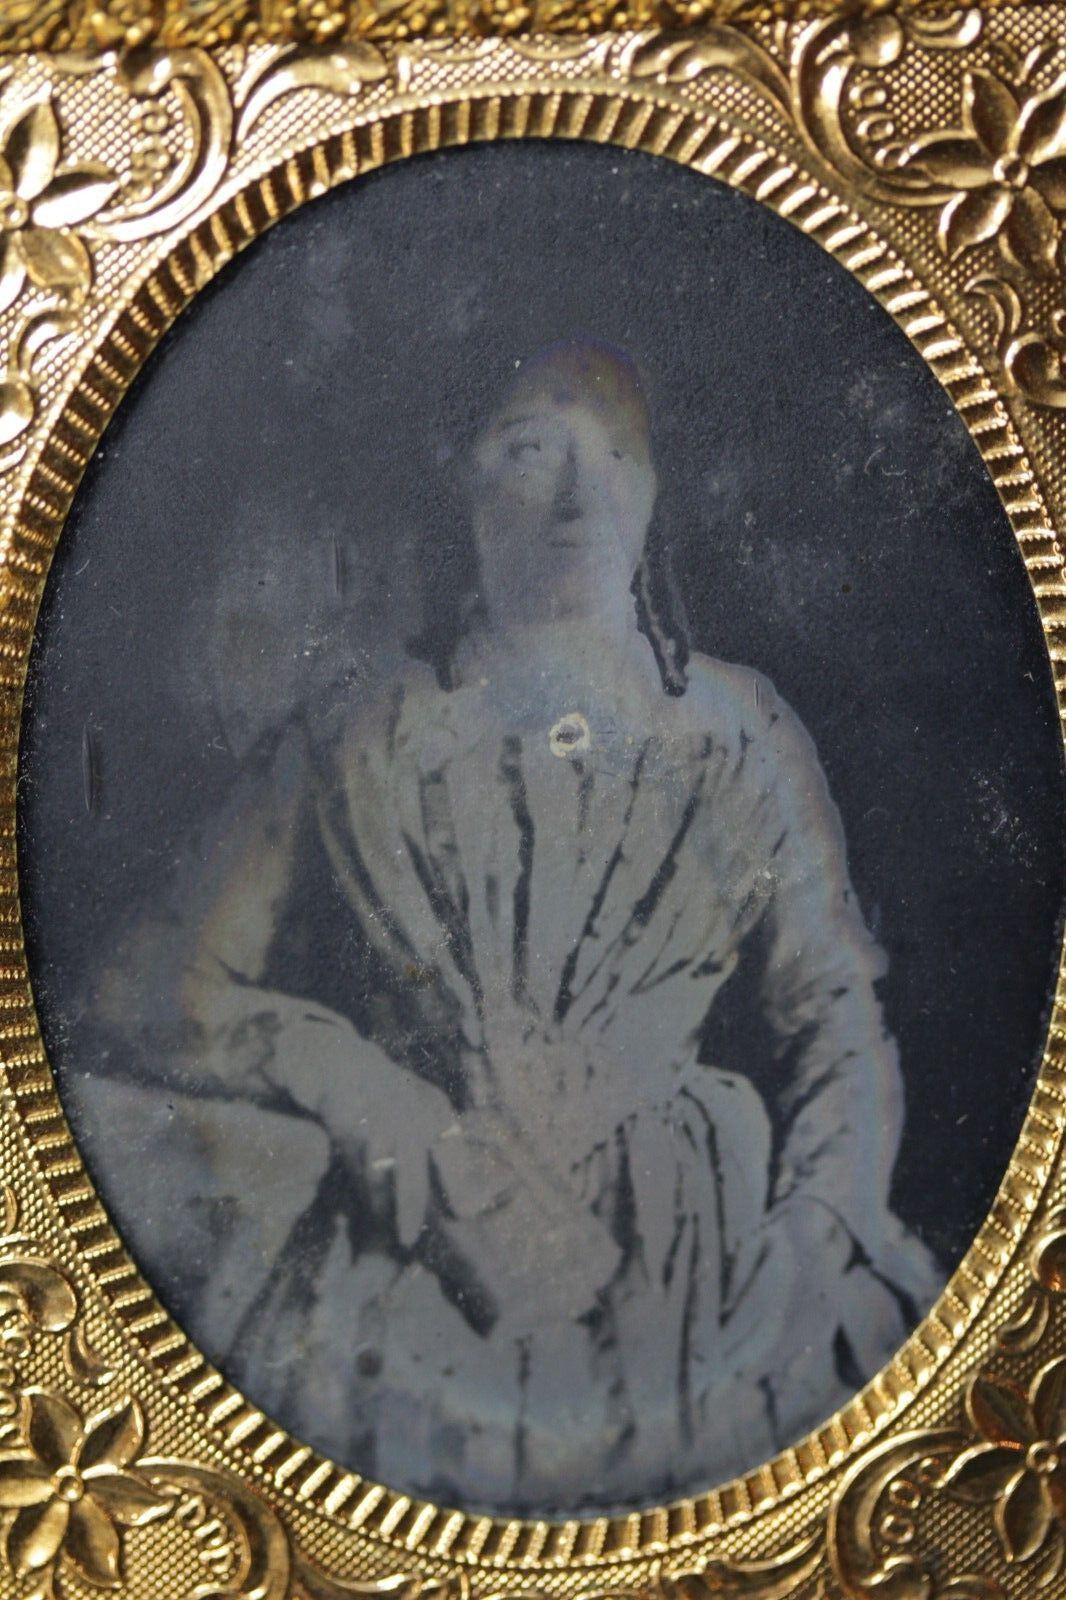 WOMAN IN GORGEOUS DRESS DAGUERREOTYPE HOLDING BOOK/BIBLE? #RL